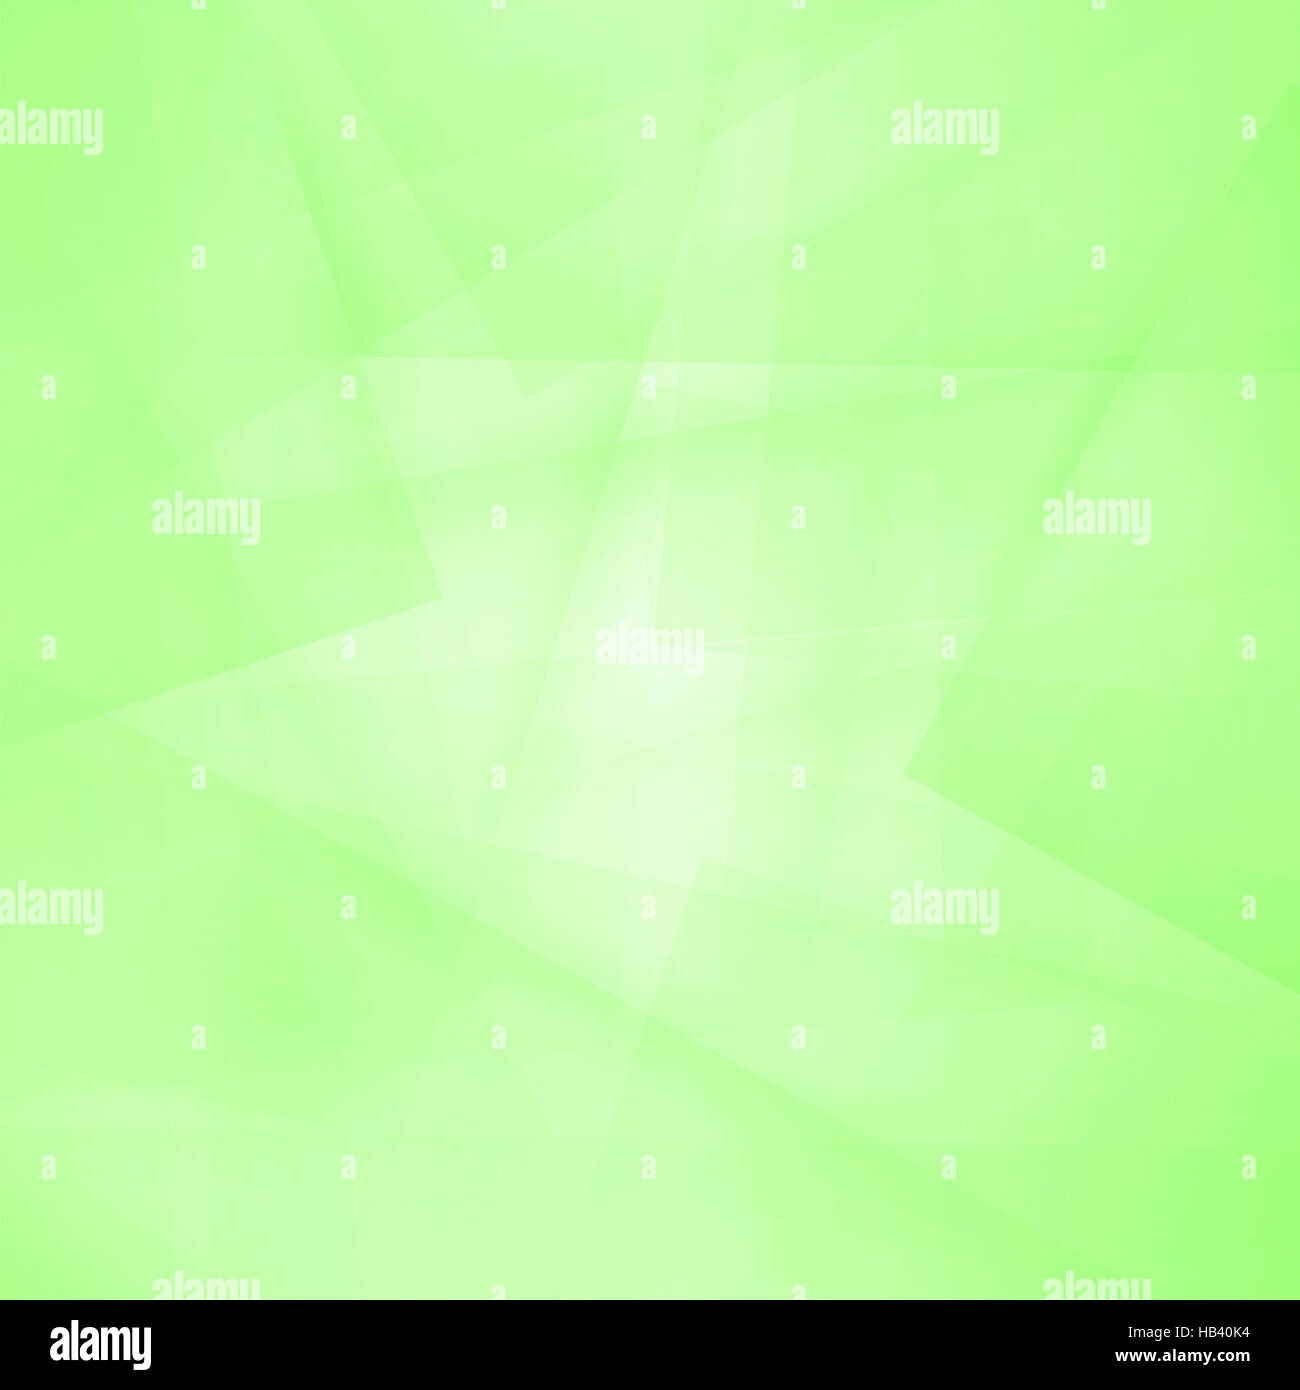 Abstract Green Line Pattern Stock Photo